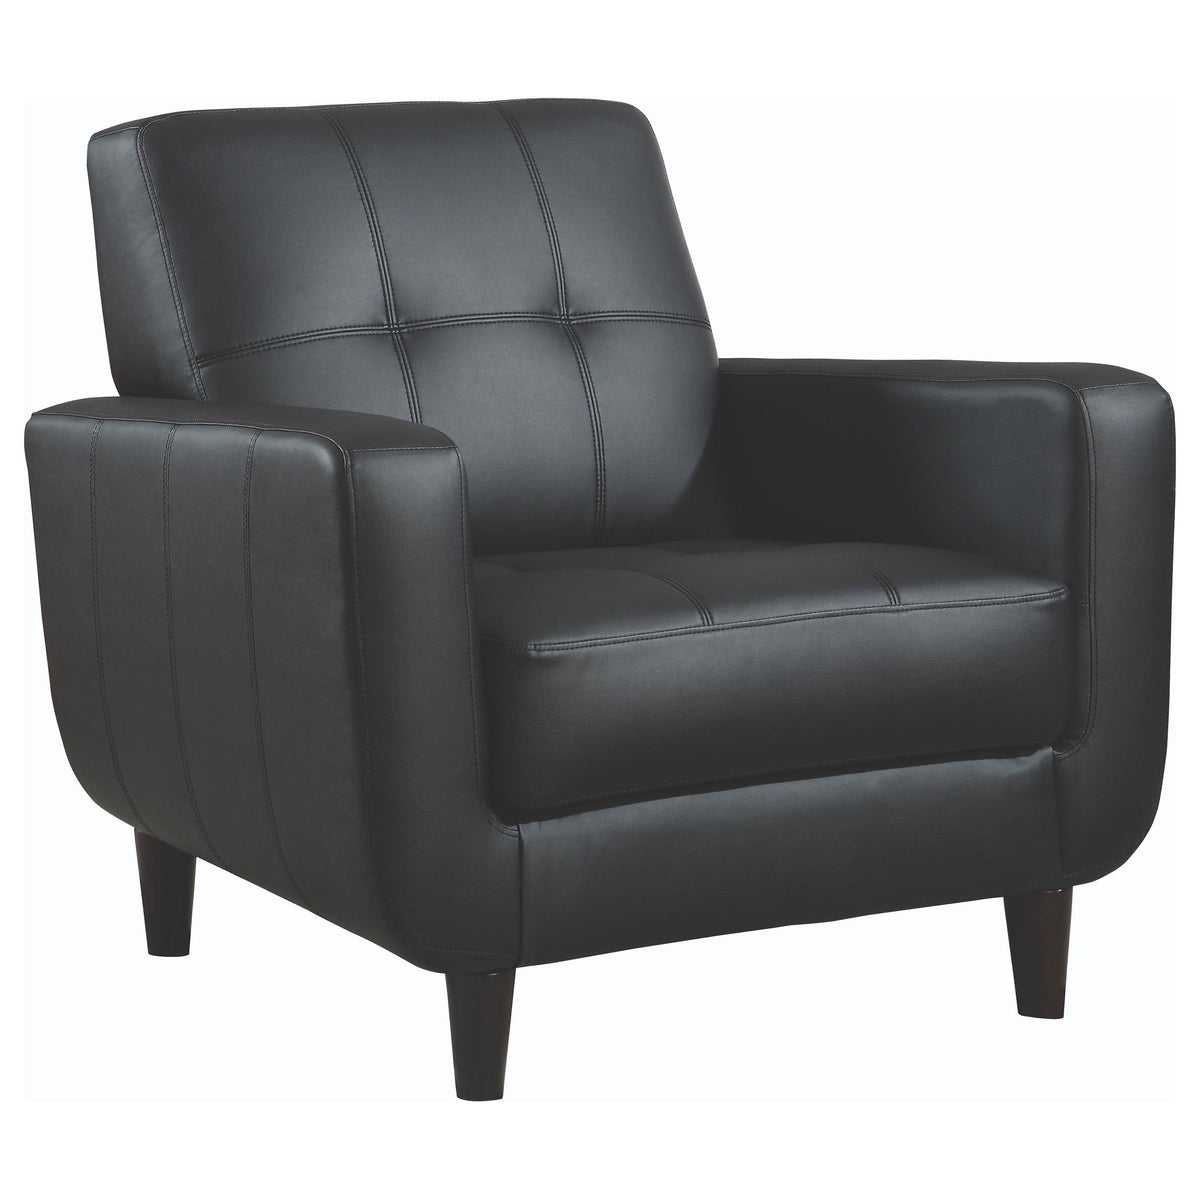 Aaron Padded Seat Accent Chair Black Aaron Padded Seat Accent Chair Black 